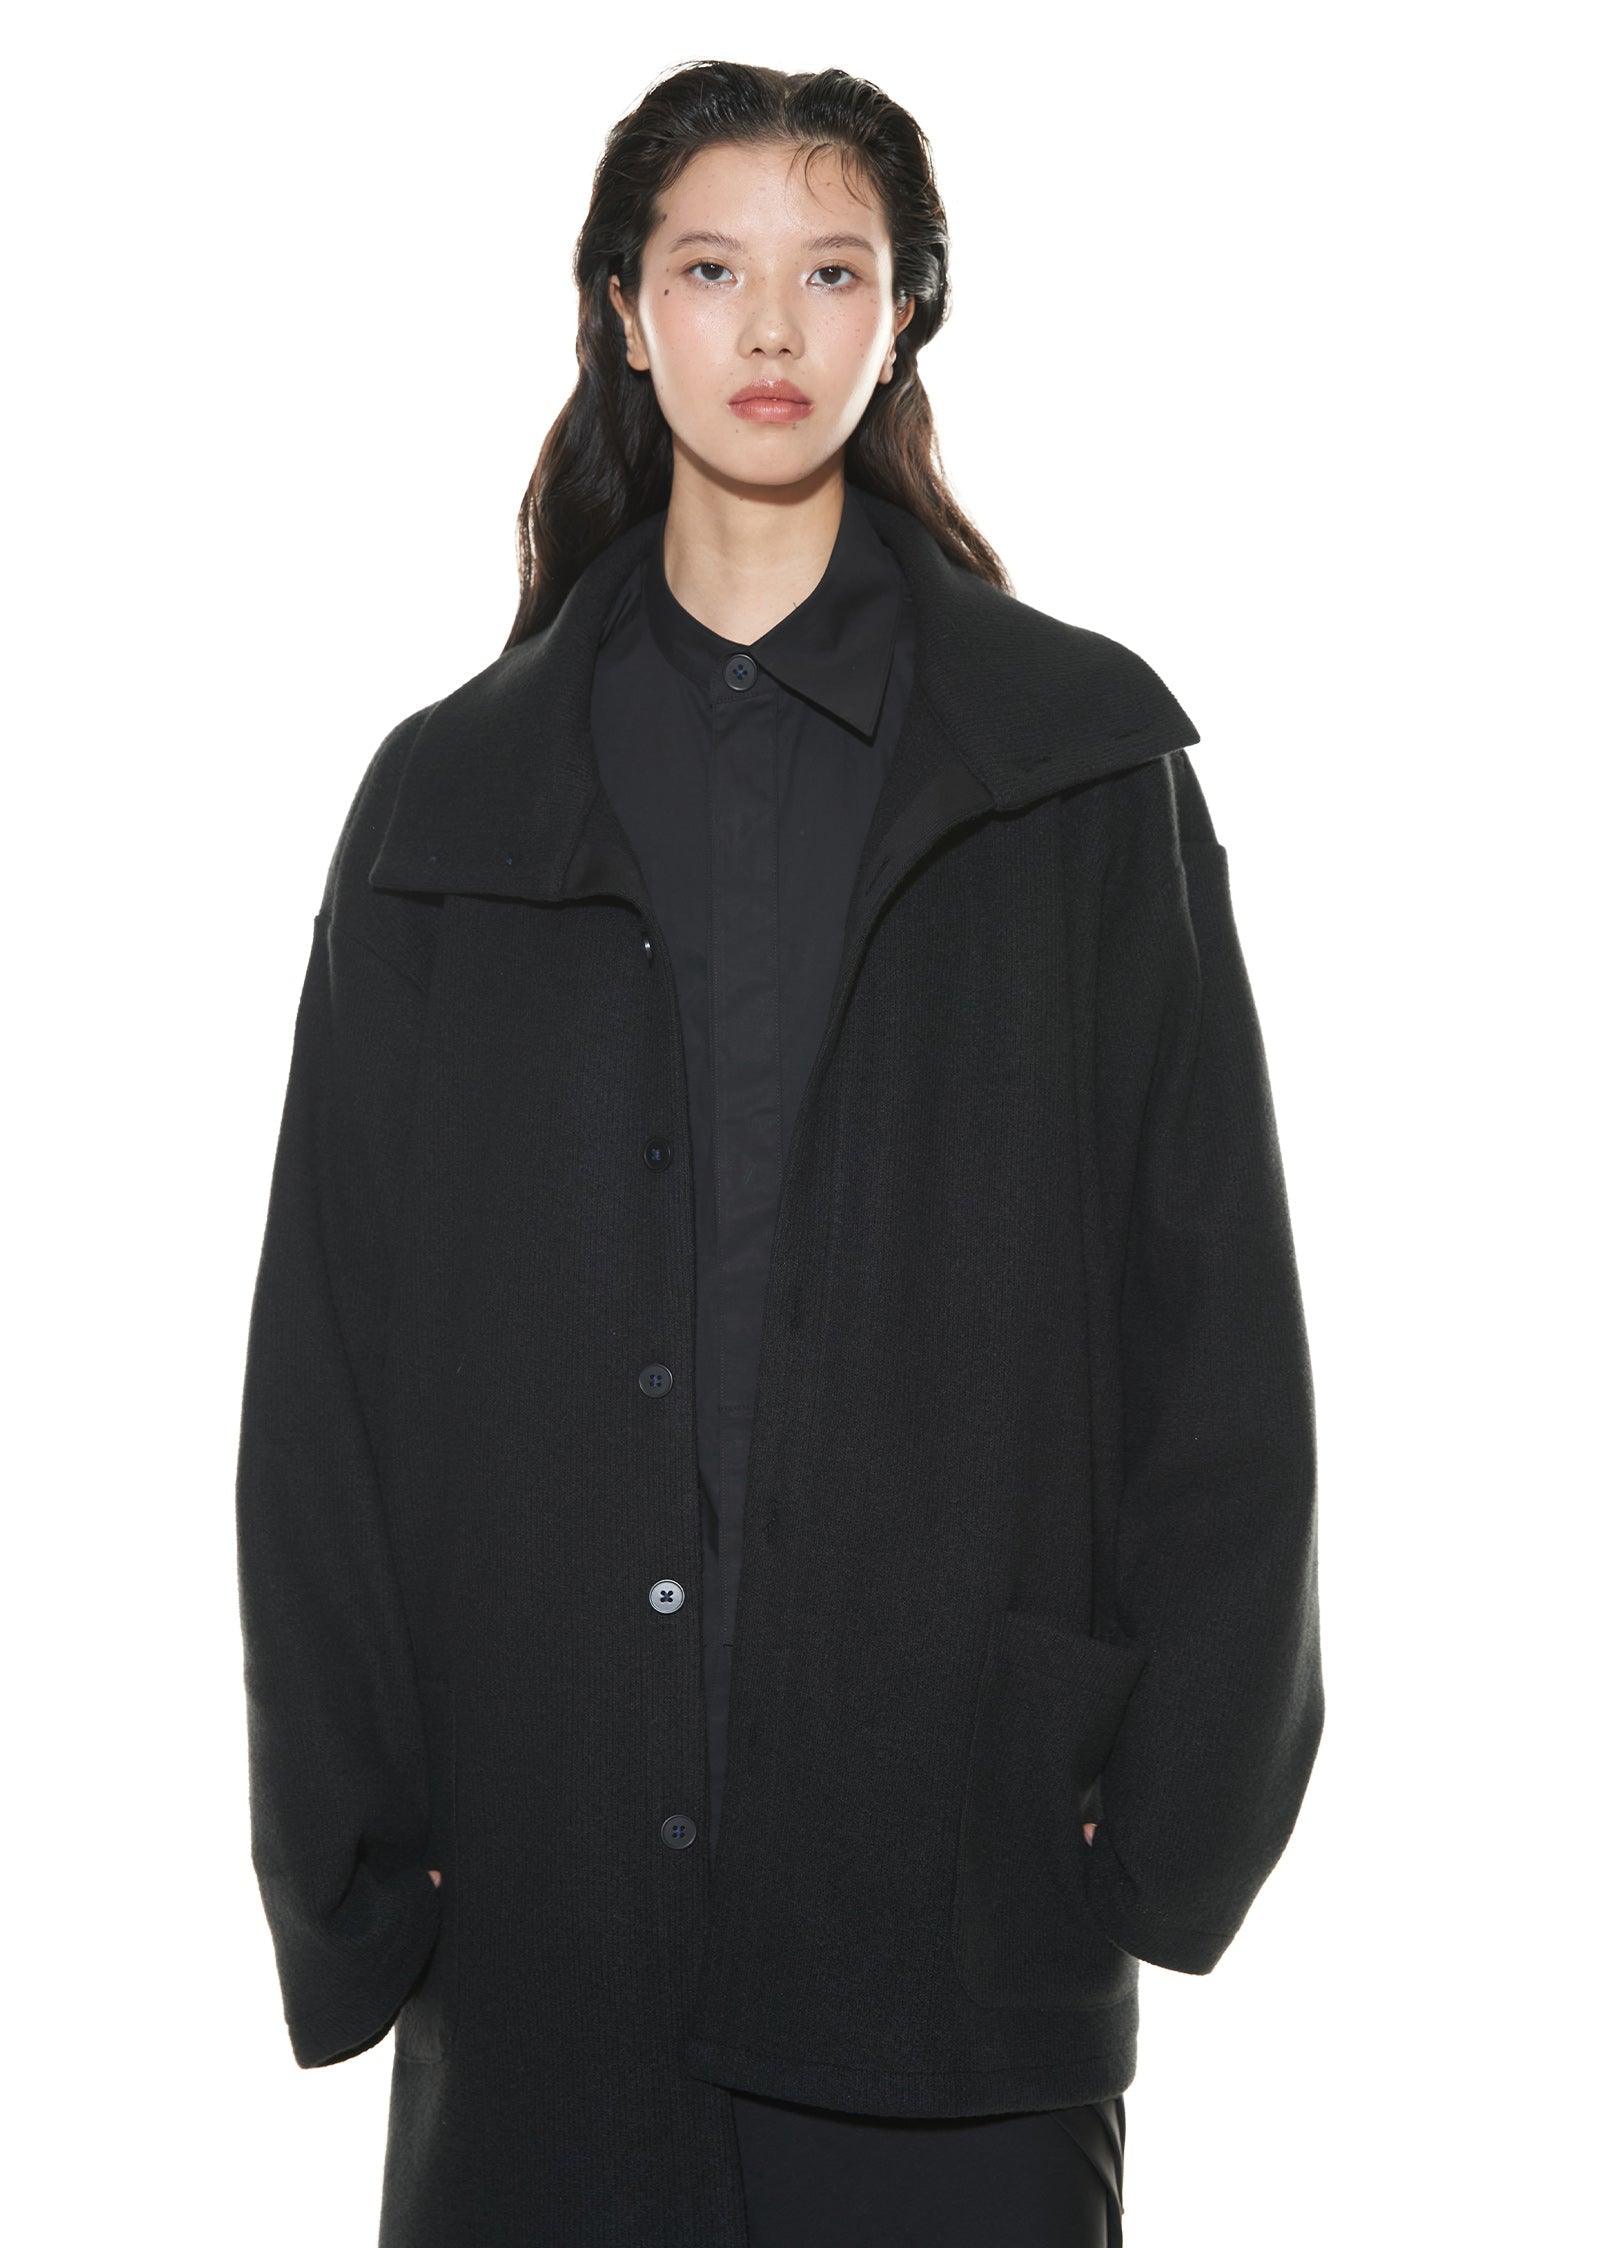 Asymmetrical Stand Collar Overcoat by VAPOUR BLUE - chiclara